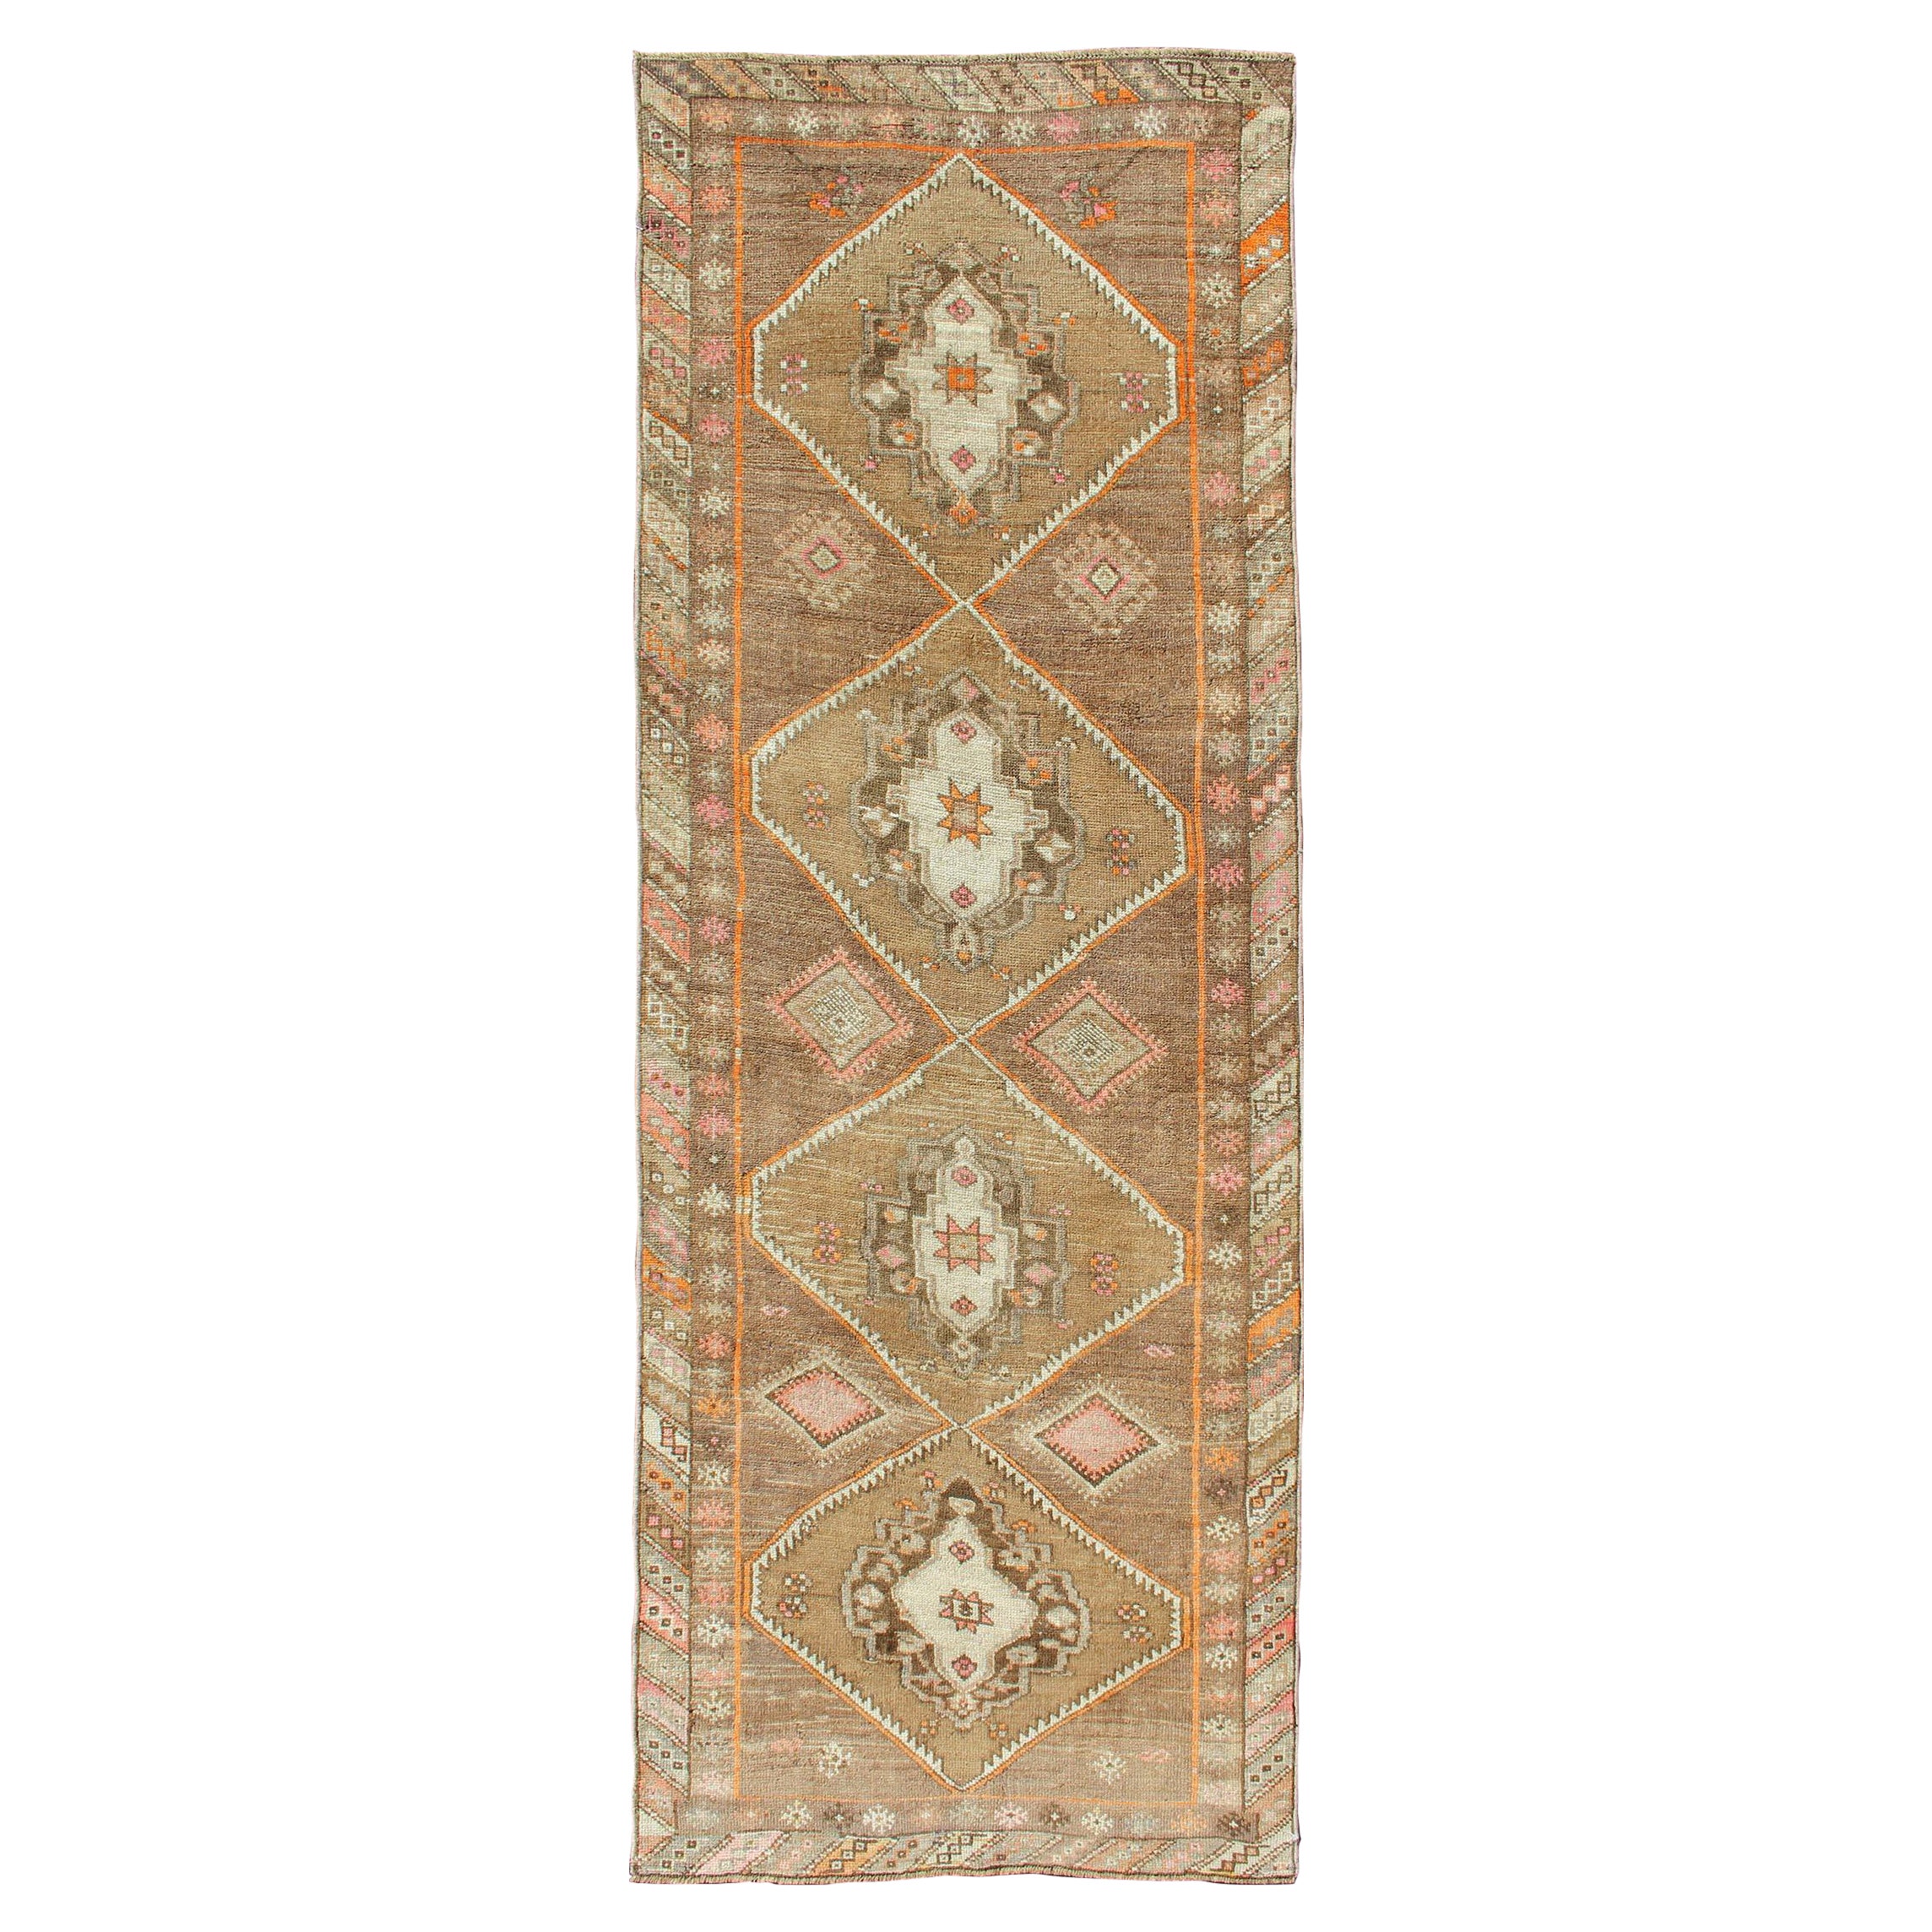 Vintage Turkish Oushak Runner with Tribal Medallions in Earthy Tones